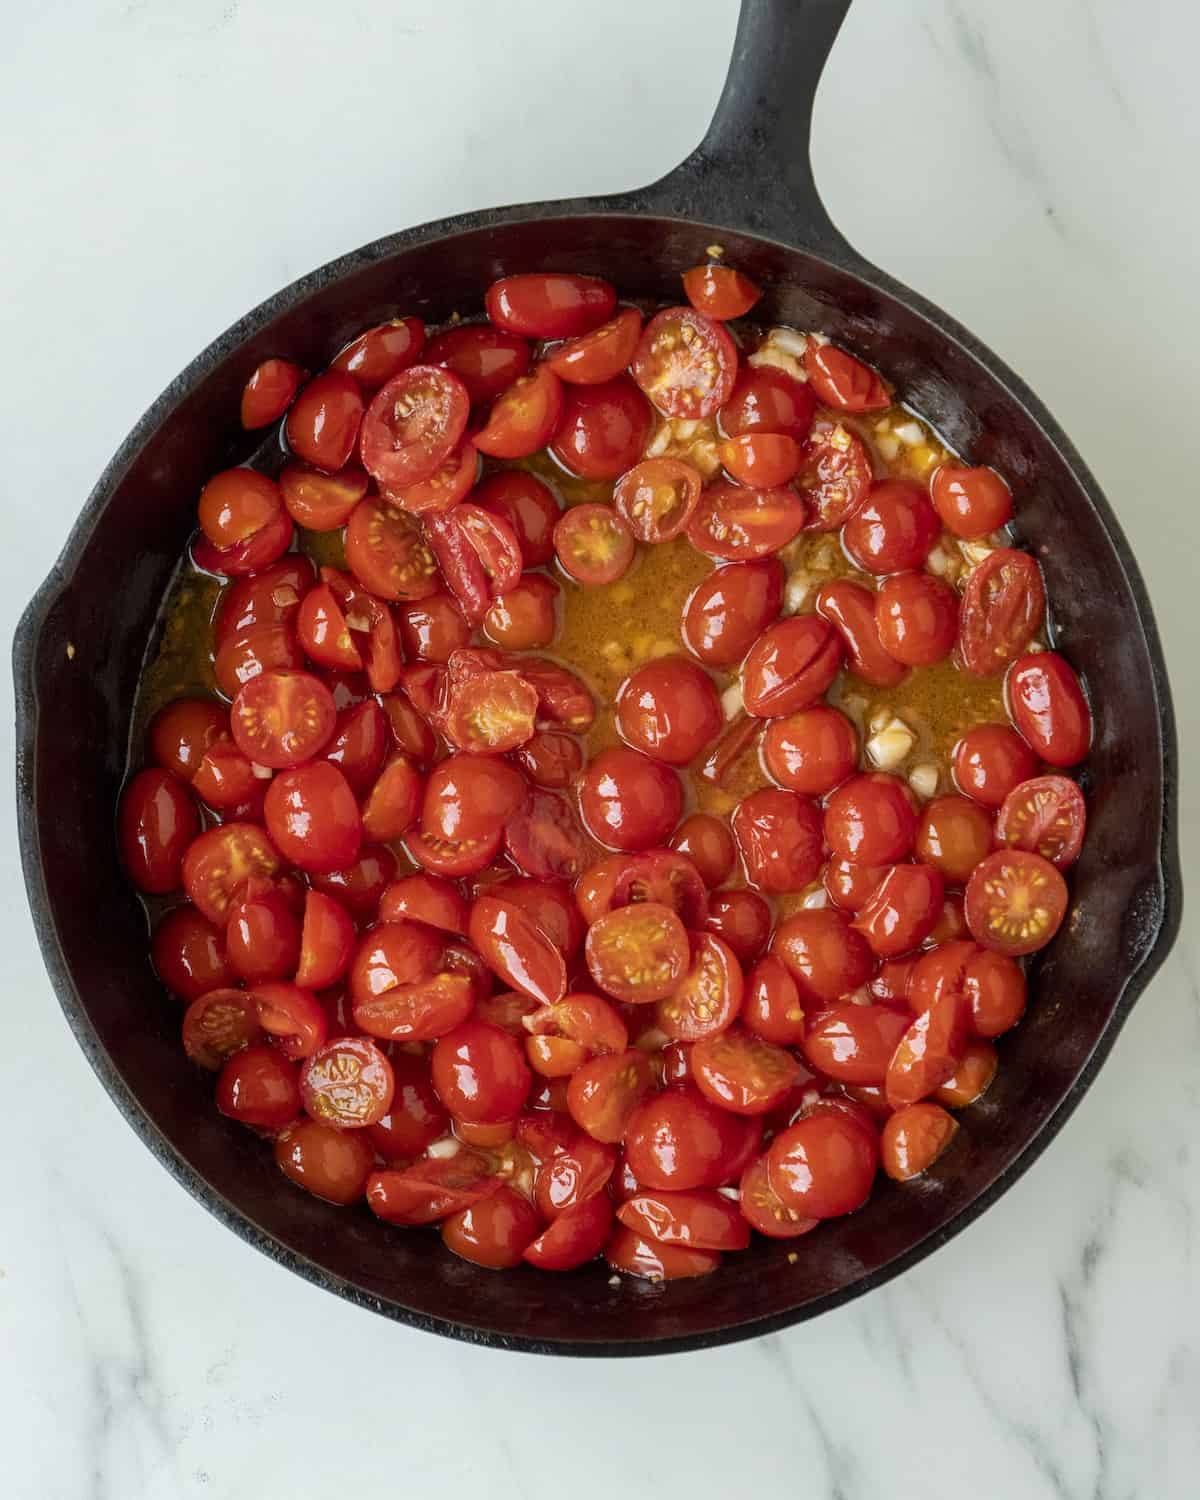 A skillet with cherry tomatoes being cooked in oil and garlic.